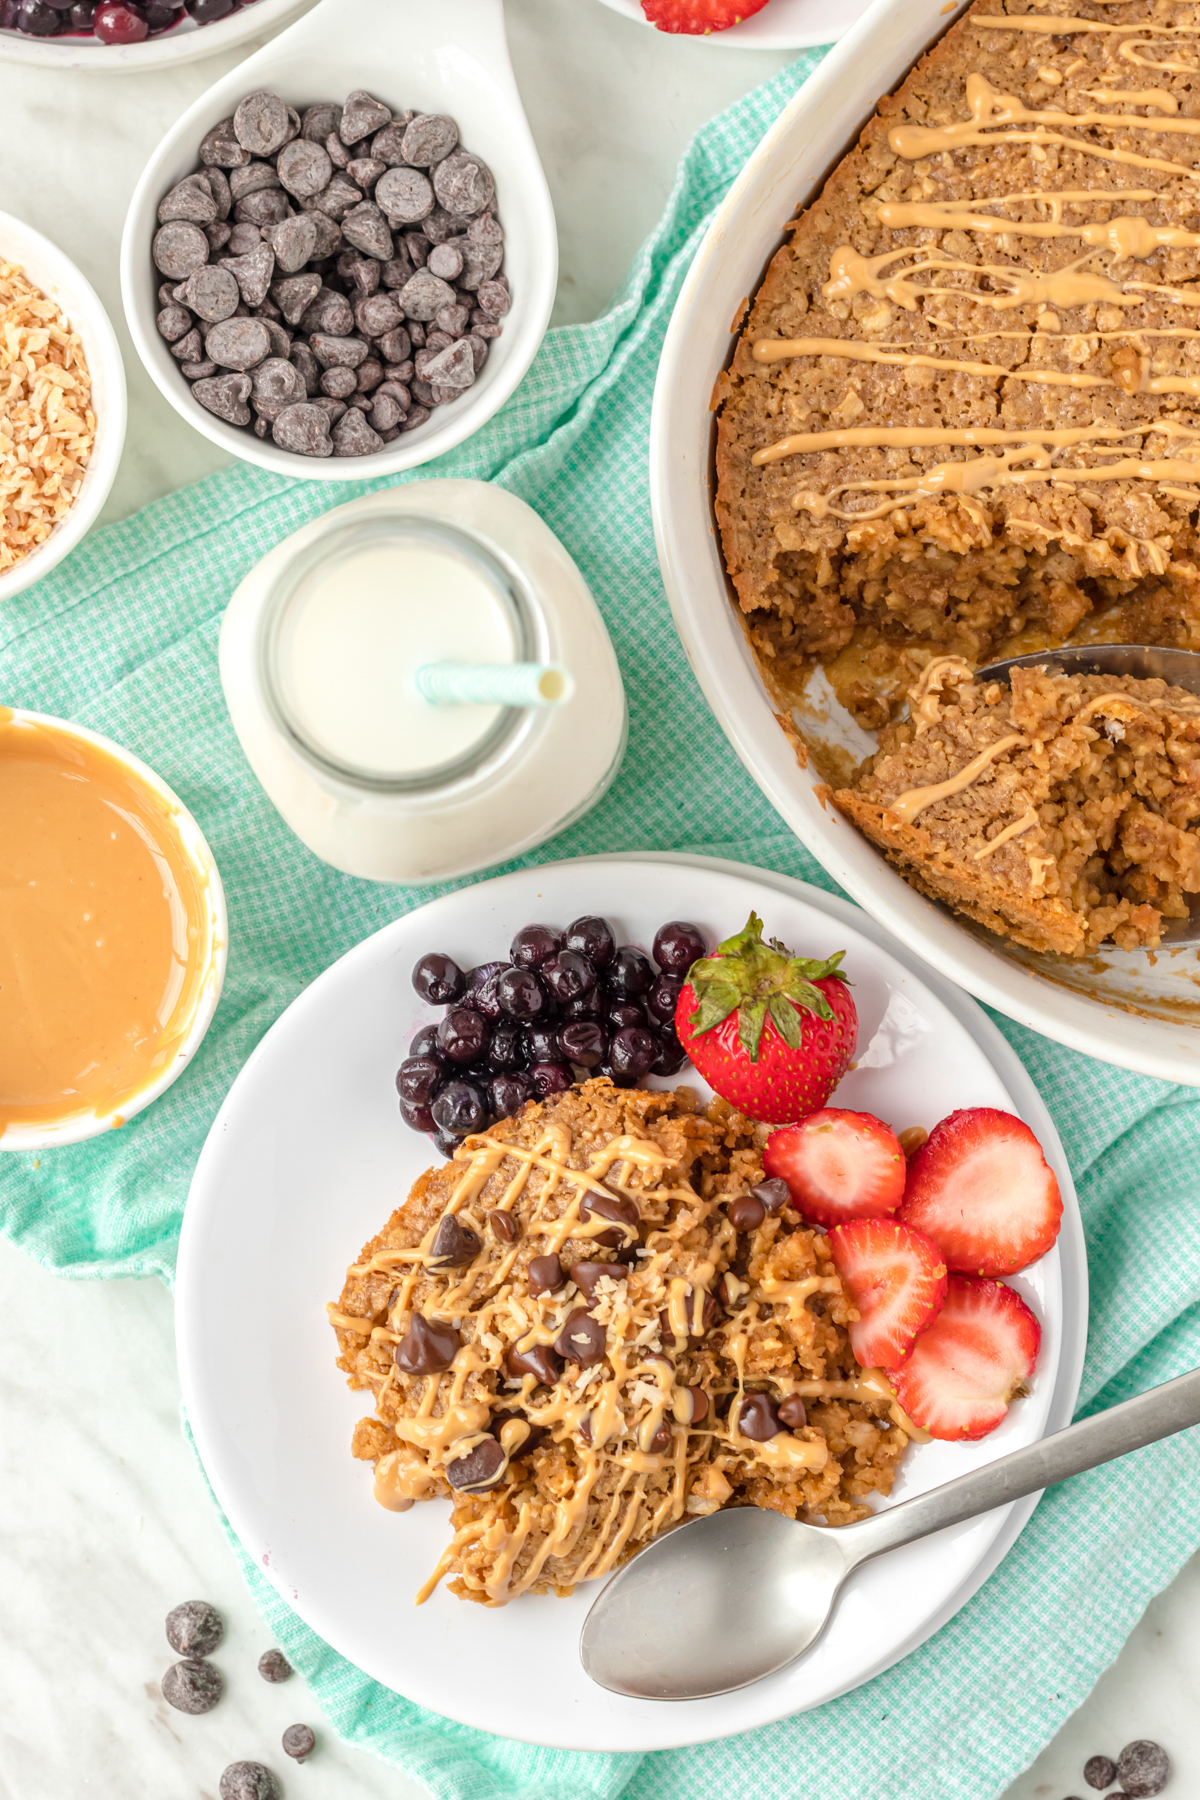 Healthy baked peanut butter oatmeal with healthy toppings on table.